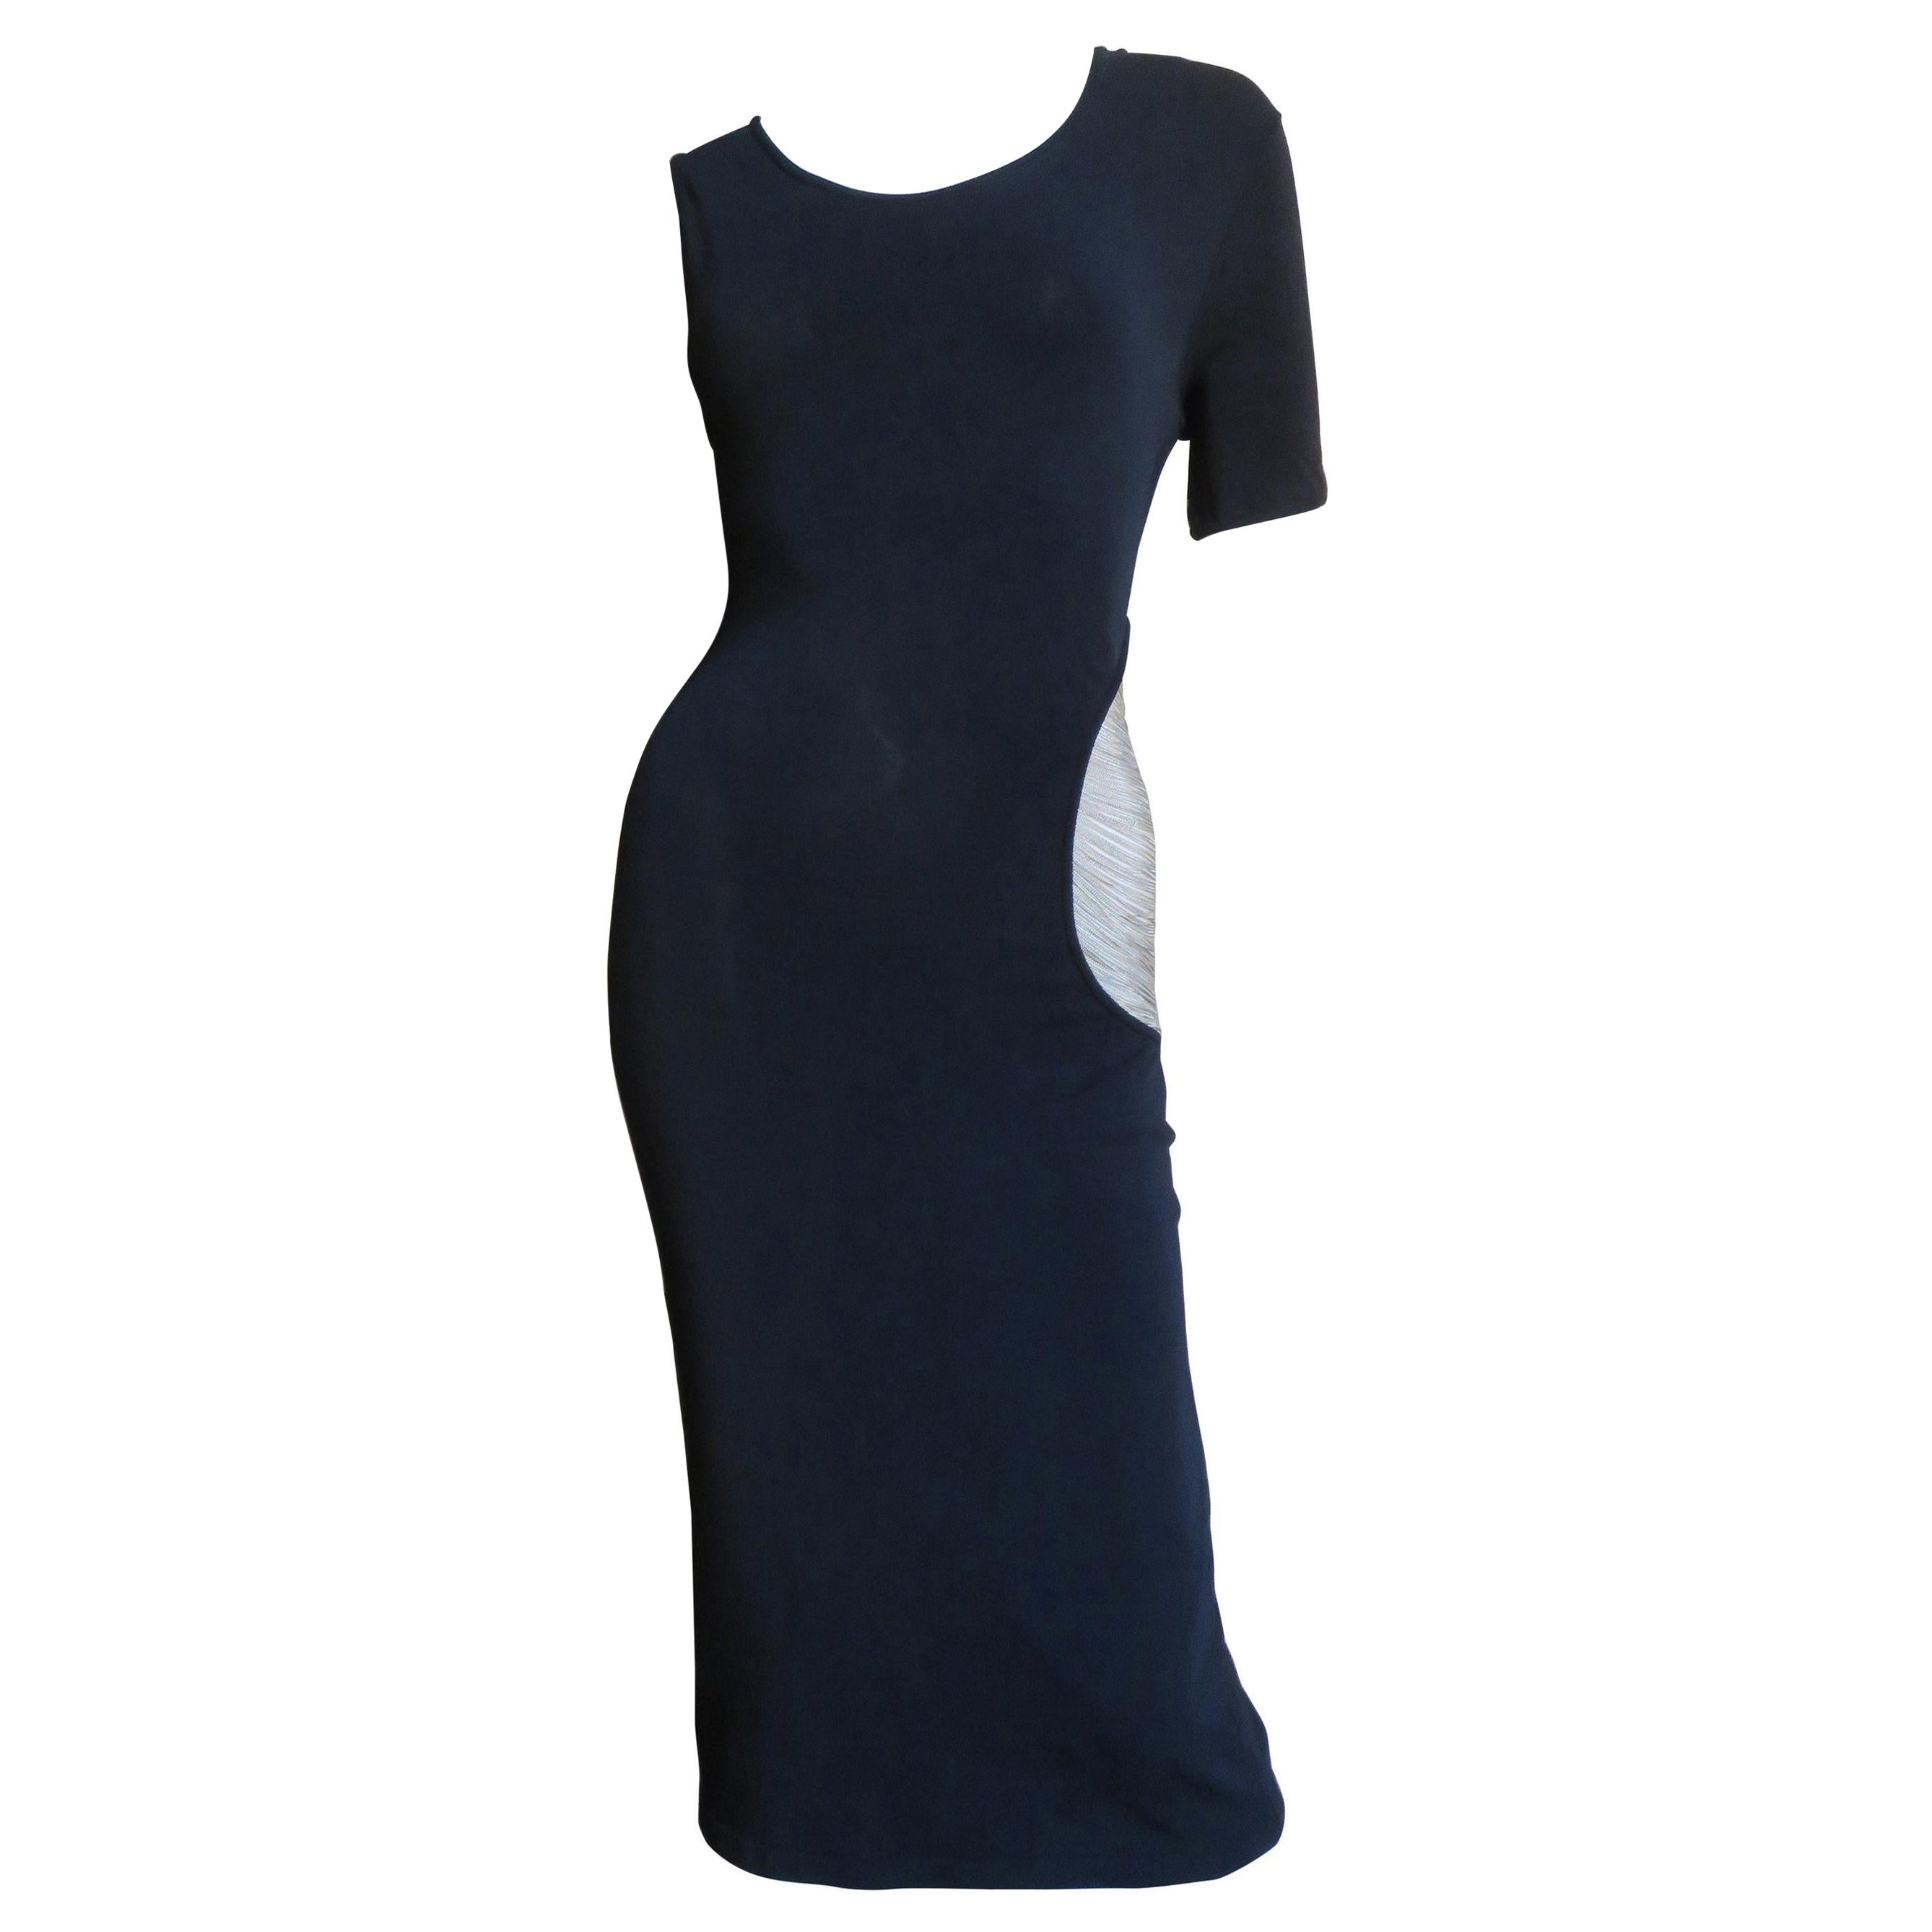 Alexander McQueen Asymmetric Dress with Chain Cut out For Sale